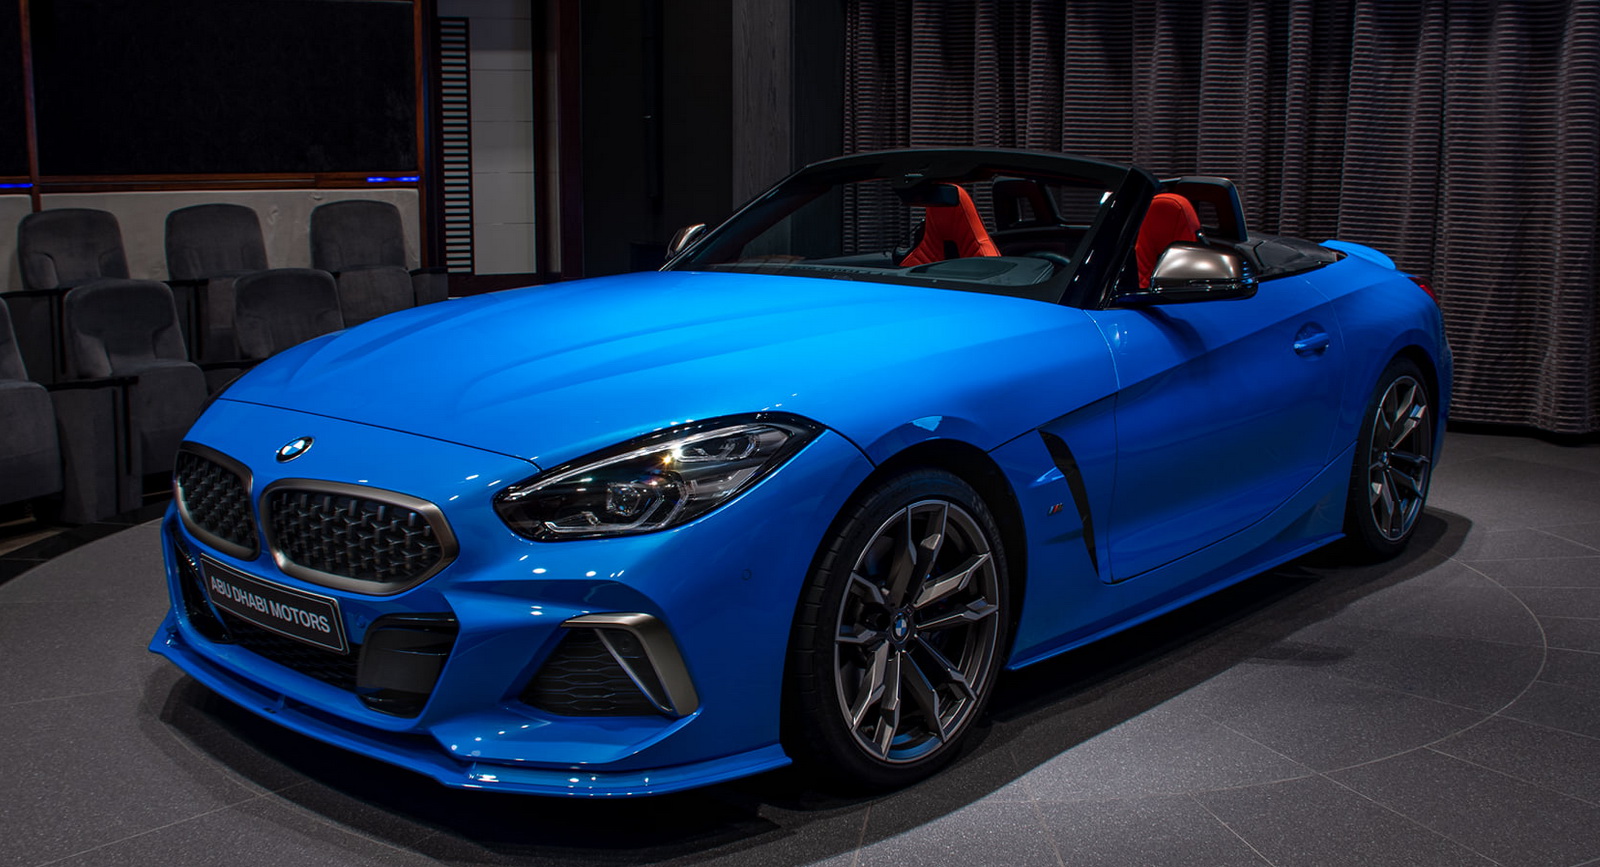 misano-blue-bmw-z4-with-ac-schnitzer-tweaks-is-a-looker-carscoops